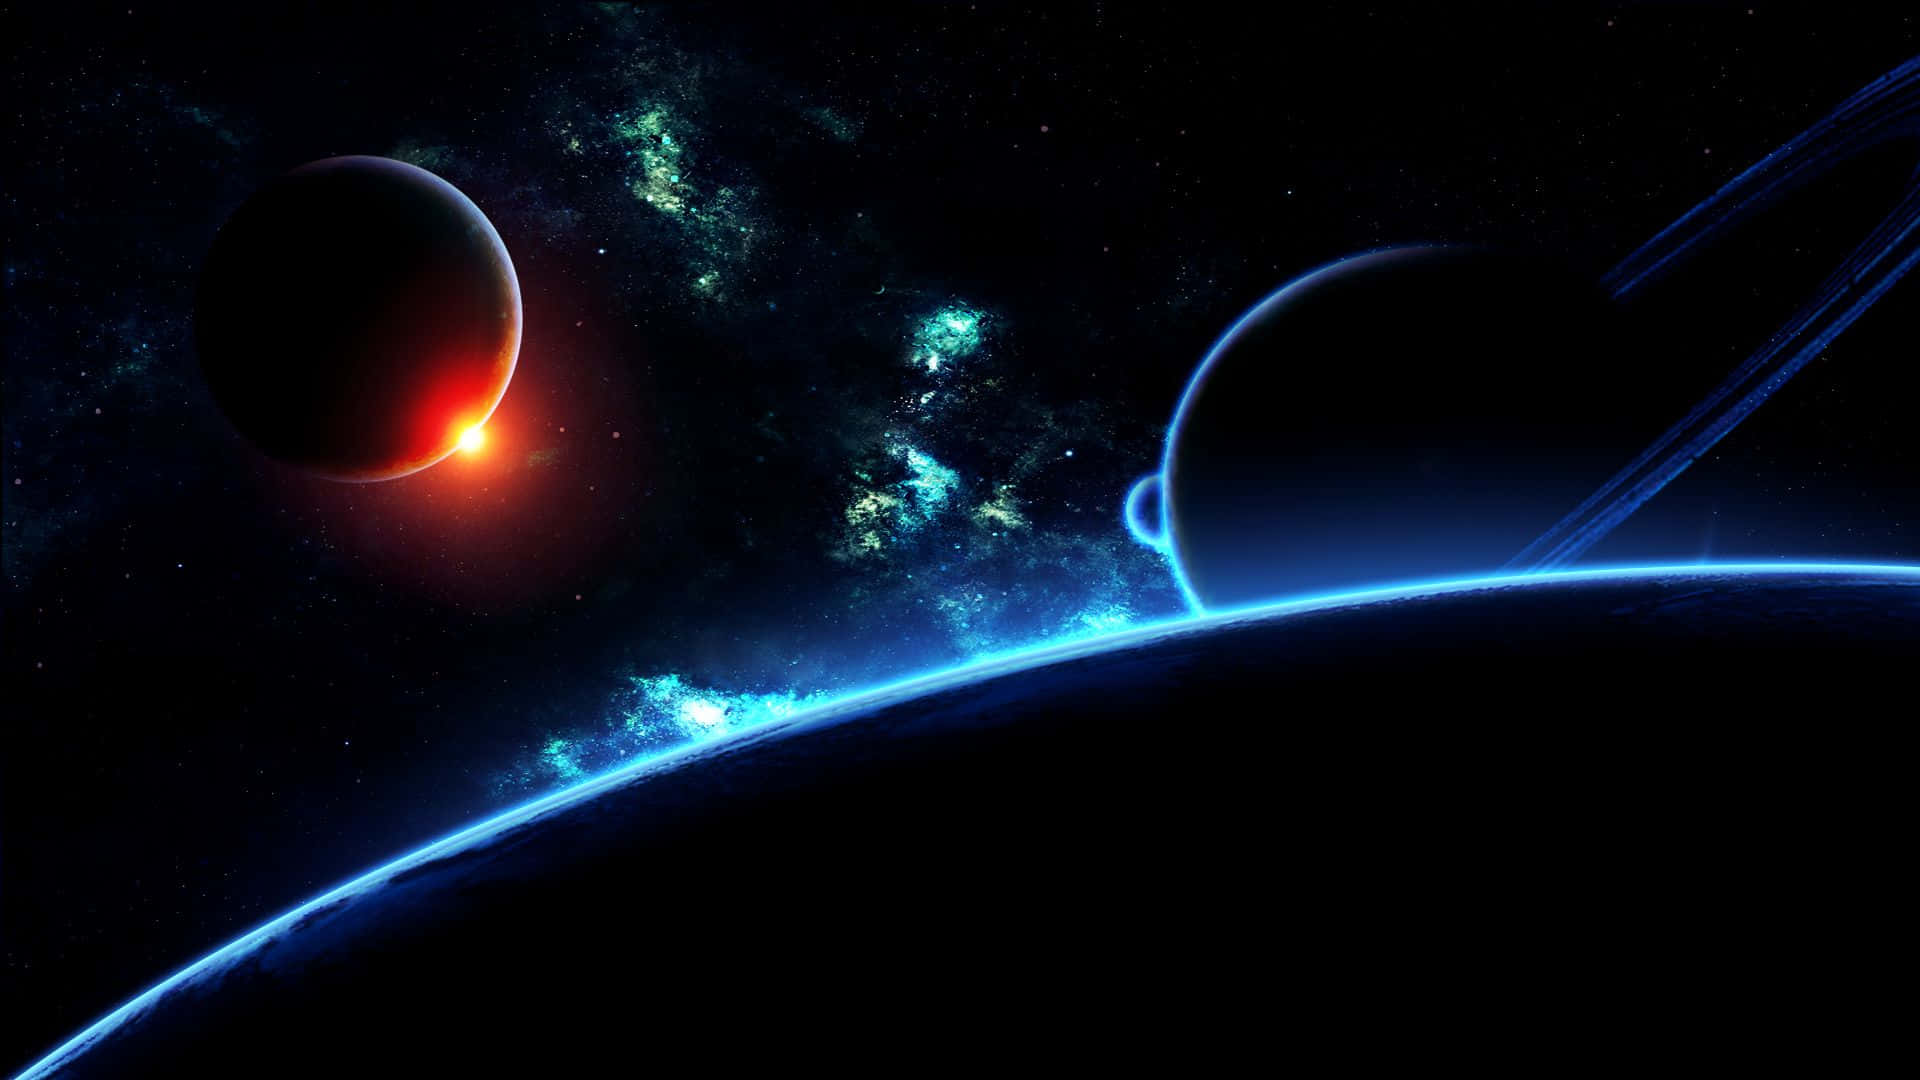 Glowing Surface Of Planet In Dark Space Wallpaper